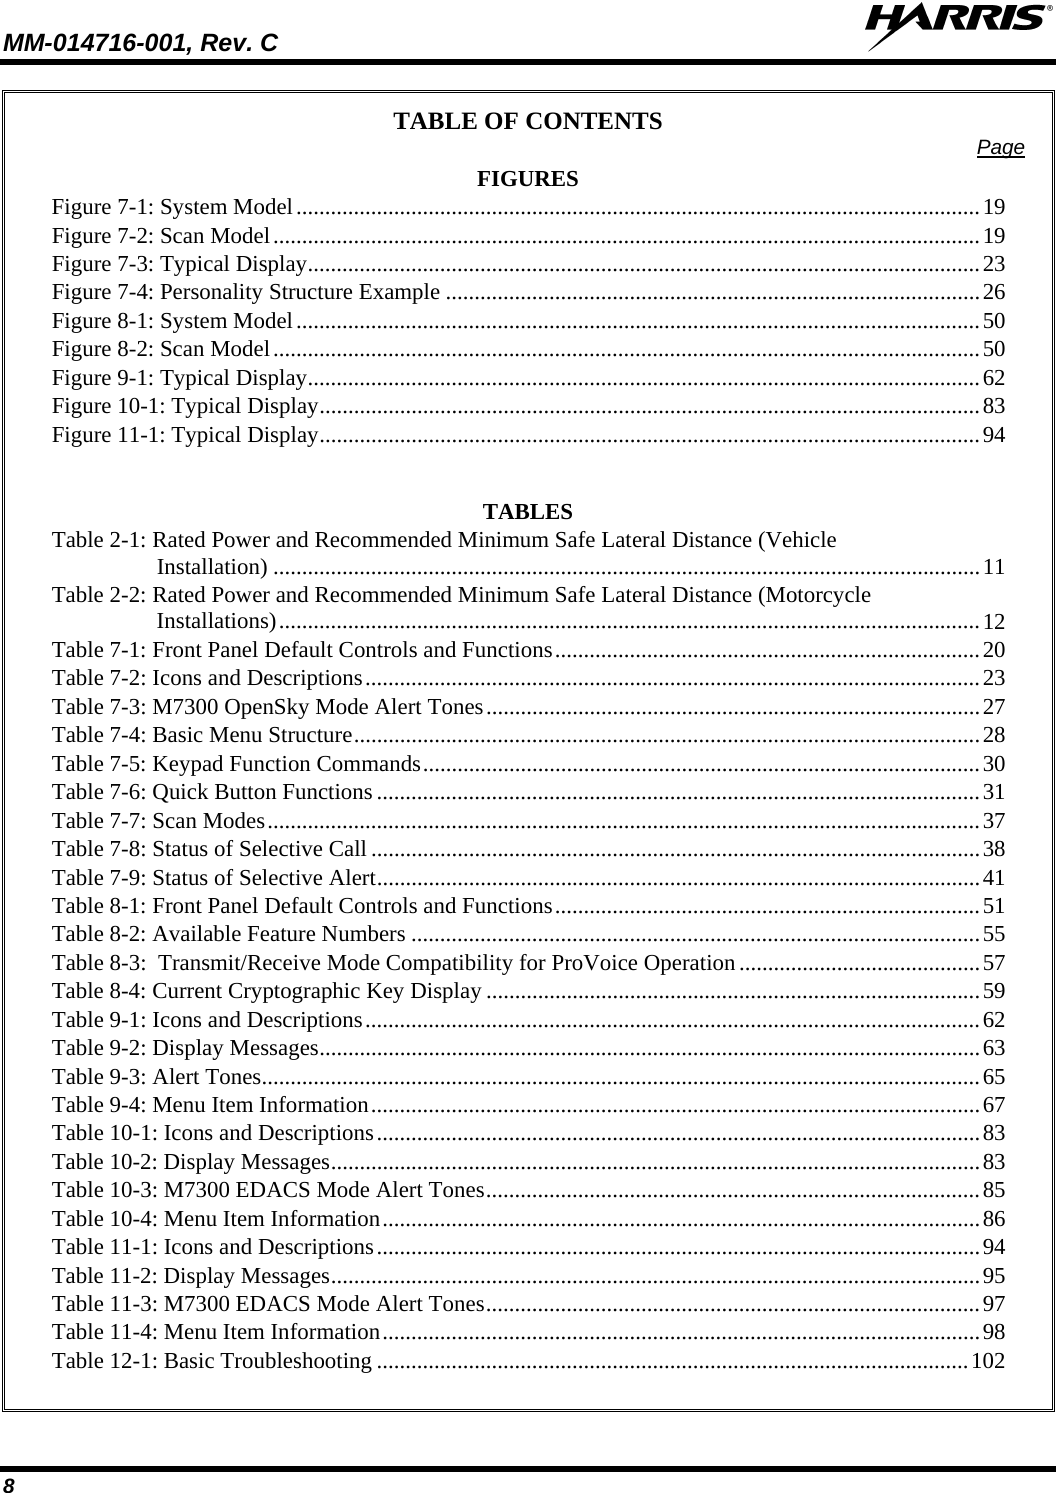 MM-014716-001, Rev. C  8 TABLE OF CONTENTS  Page FIGURES Figure 7-1: System Model.......................................................................................................................19 Figure 7-2: Scan Model...........................................................................................................................19 Figure 7-3: Typical Display.....................................................................................................................23 Figure 7-4: Personality Structure Example .............................................................................................26 Figure 8-1: System Model.......................................................................................................................50 Figure 8-2: Scan Model...........................................................................................................................50 Figure 9-1: Typical Display.....................................................................................................................62 Figure 10-1: Typical Display...................................................................................................................83 Figure 11-1: Typical Display...................................................................................................................94   TABLES Table 2-1: Rated Power and Recommended Minimum Safe Lateral Distance (Vehicle Installation) ...........................................................................................................................11 Table 2-2: Rated Power and Recommended Minimum Safe Lateral Distance (Motorcycle Installations)..........................................................................................................................12 Table 7-1: Front Panel Default Controls and Functions..........................................................................20 Table 7-2: Icons and Descriptions...........................................................................................................23 Table 7-3: M7300 OpenSky Mode Alert Tones......................................................................................27 Table 7-4: Basic Menu Structure.............................................................................................................28 Table 7-5: Keypad Function Commands.................................................................................................30 Table 7-6: Quick Button Functions .........................................................................................................31 Table 7-7: Scan Modes............................................................................................................................37 Table 7-8: Status of Selective Call ..........................................................................................................38 Table 7-9: Status of Selective Alert.........................................................................................................41 Table 8-1: Front Panel Default Controls and Functions..........................................................................51 Table 8-2: Available Feature Numbers ...................................................................................................55 Table 8-3:  Transmit/Receive Mode Compatibility for ProVoice Operation..........................................57 Table 8-4: Current Cryptographic Key Display ......................................................................................59 Table 9-1: Icons and Descriptions...........................................................................................................62 Table 9-2: Display Messages...................................................................................................................63 Table 9-3: Alert Tones.............................................................................................................................65 Table 9-4: Menu Item Information..........................................................................................................67 Table 10-1: Icons and Descriptions.........................................................................................................83 Table 10-2: Display Messages.................................................................................................................83 Table 10-3: M7300 EDACS Mode Alert Tones......................................................................................85 Table 10-4: Menu Item Information........................................................................................................86 Table 11-1: Icons and Descriptions.........................................................................................................94 Table 11-2: Display Messages.................................................................................................................95 Table 11-3: M7300 EDACS Mode Alert Tones......................................................................................97 Table 11-4: Menu Item Information........................................................................................................98 Table 12-1: Basic Troubleshooting .......................................................................................................102  